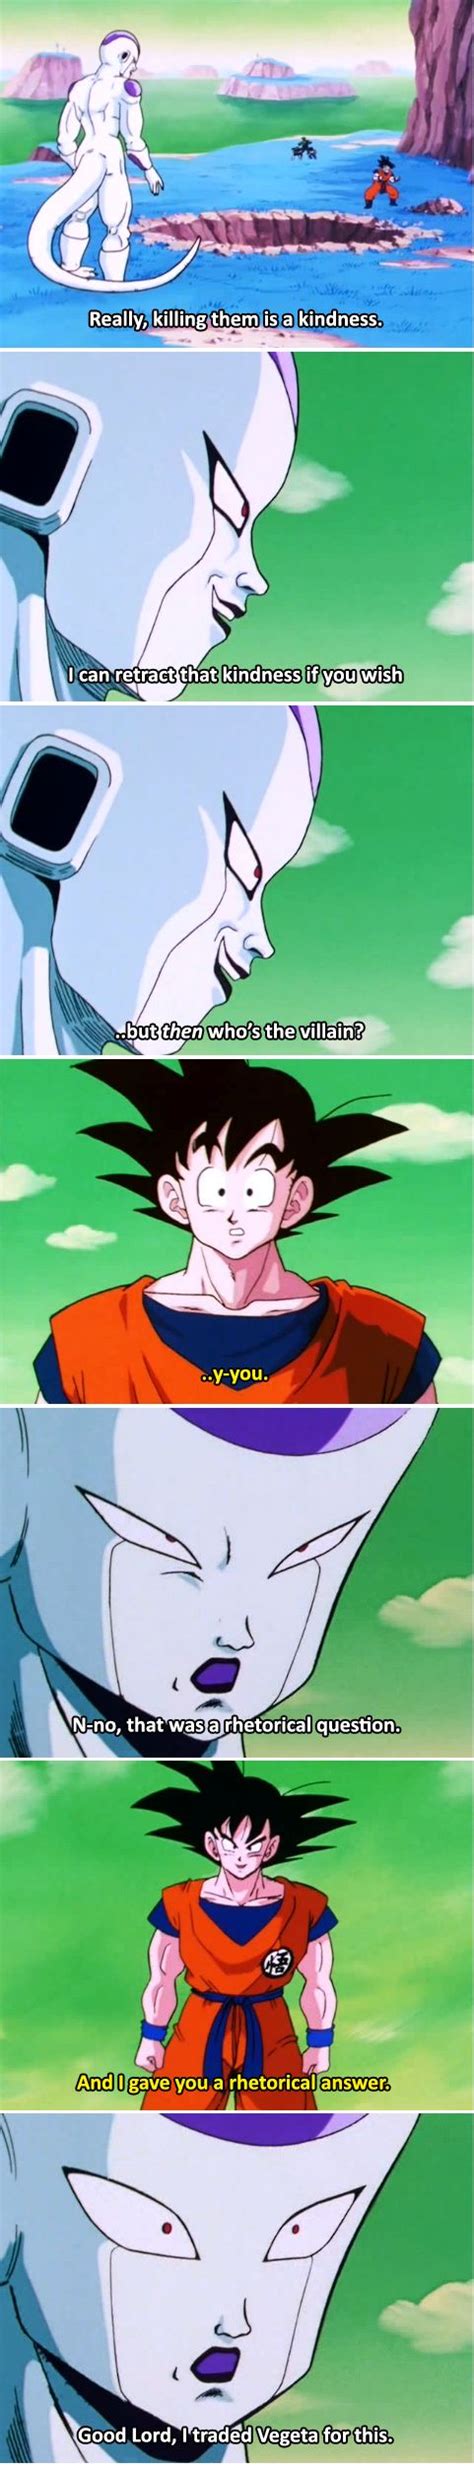 Read at your own risk! Smart move, Goku... | Anime dragon ball super, Anime dragon ball, Funny dragon